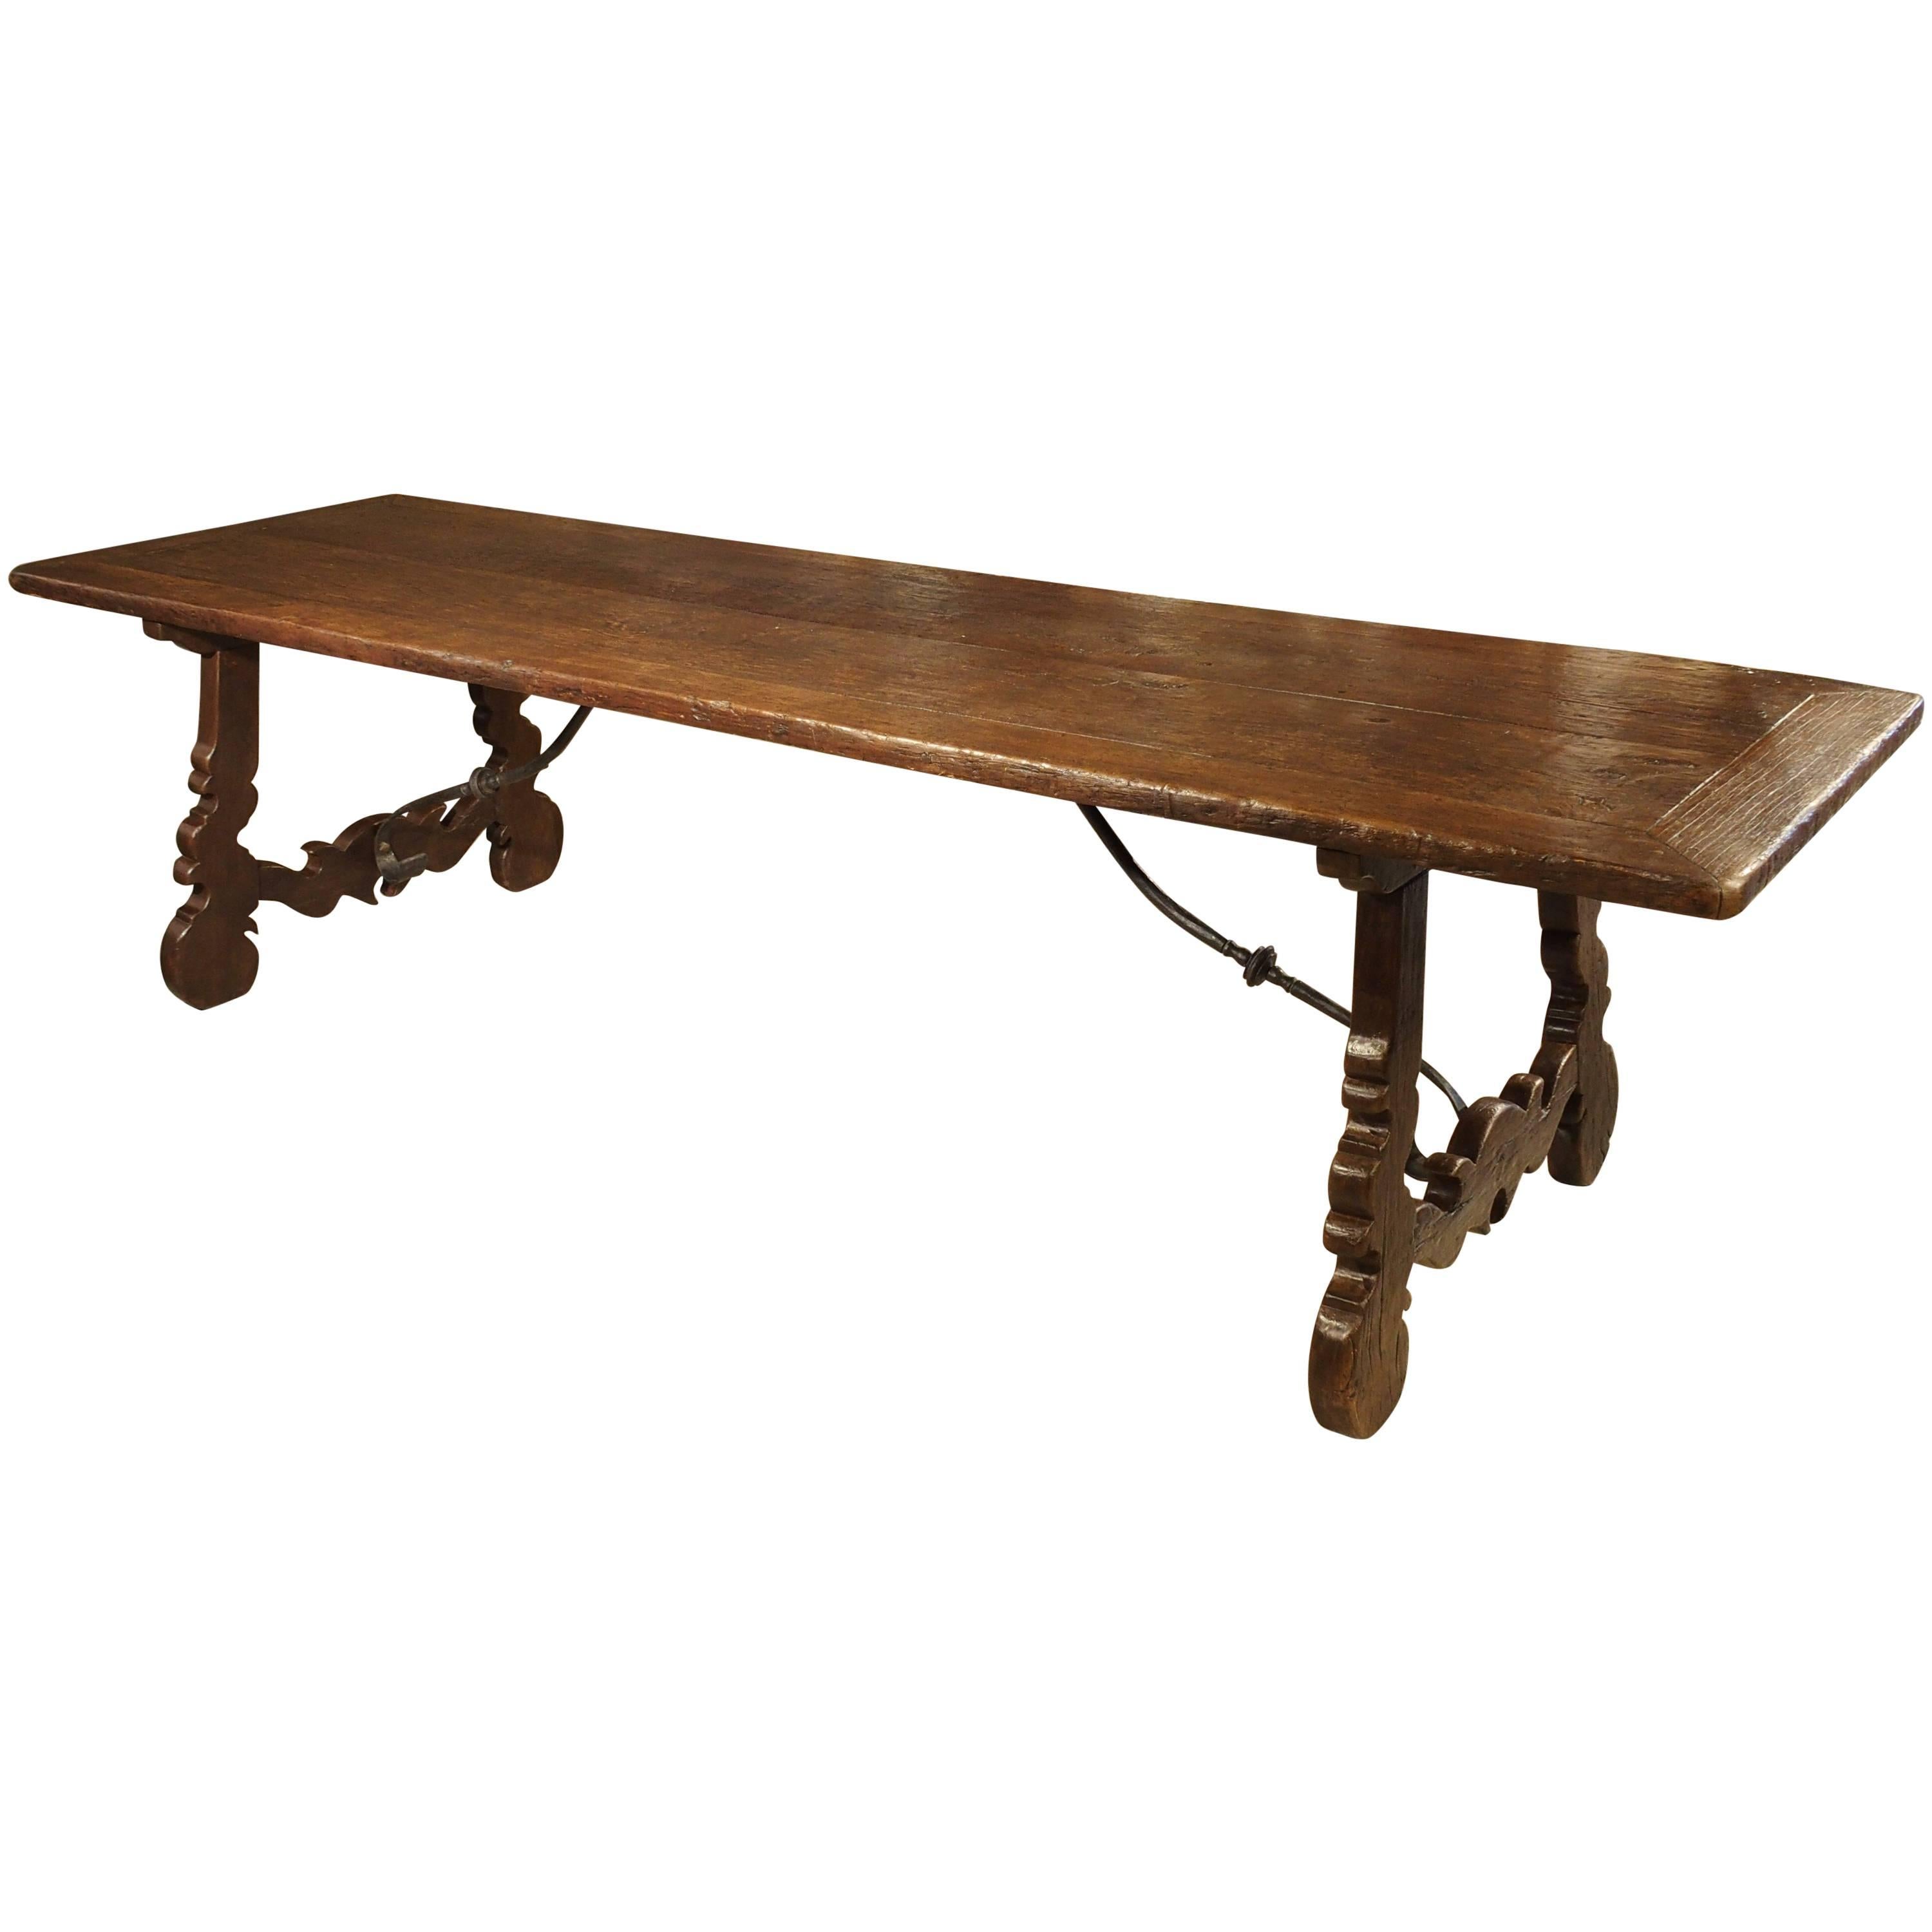 18th Century Elmwood Dining Table from Spain